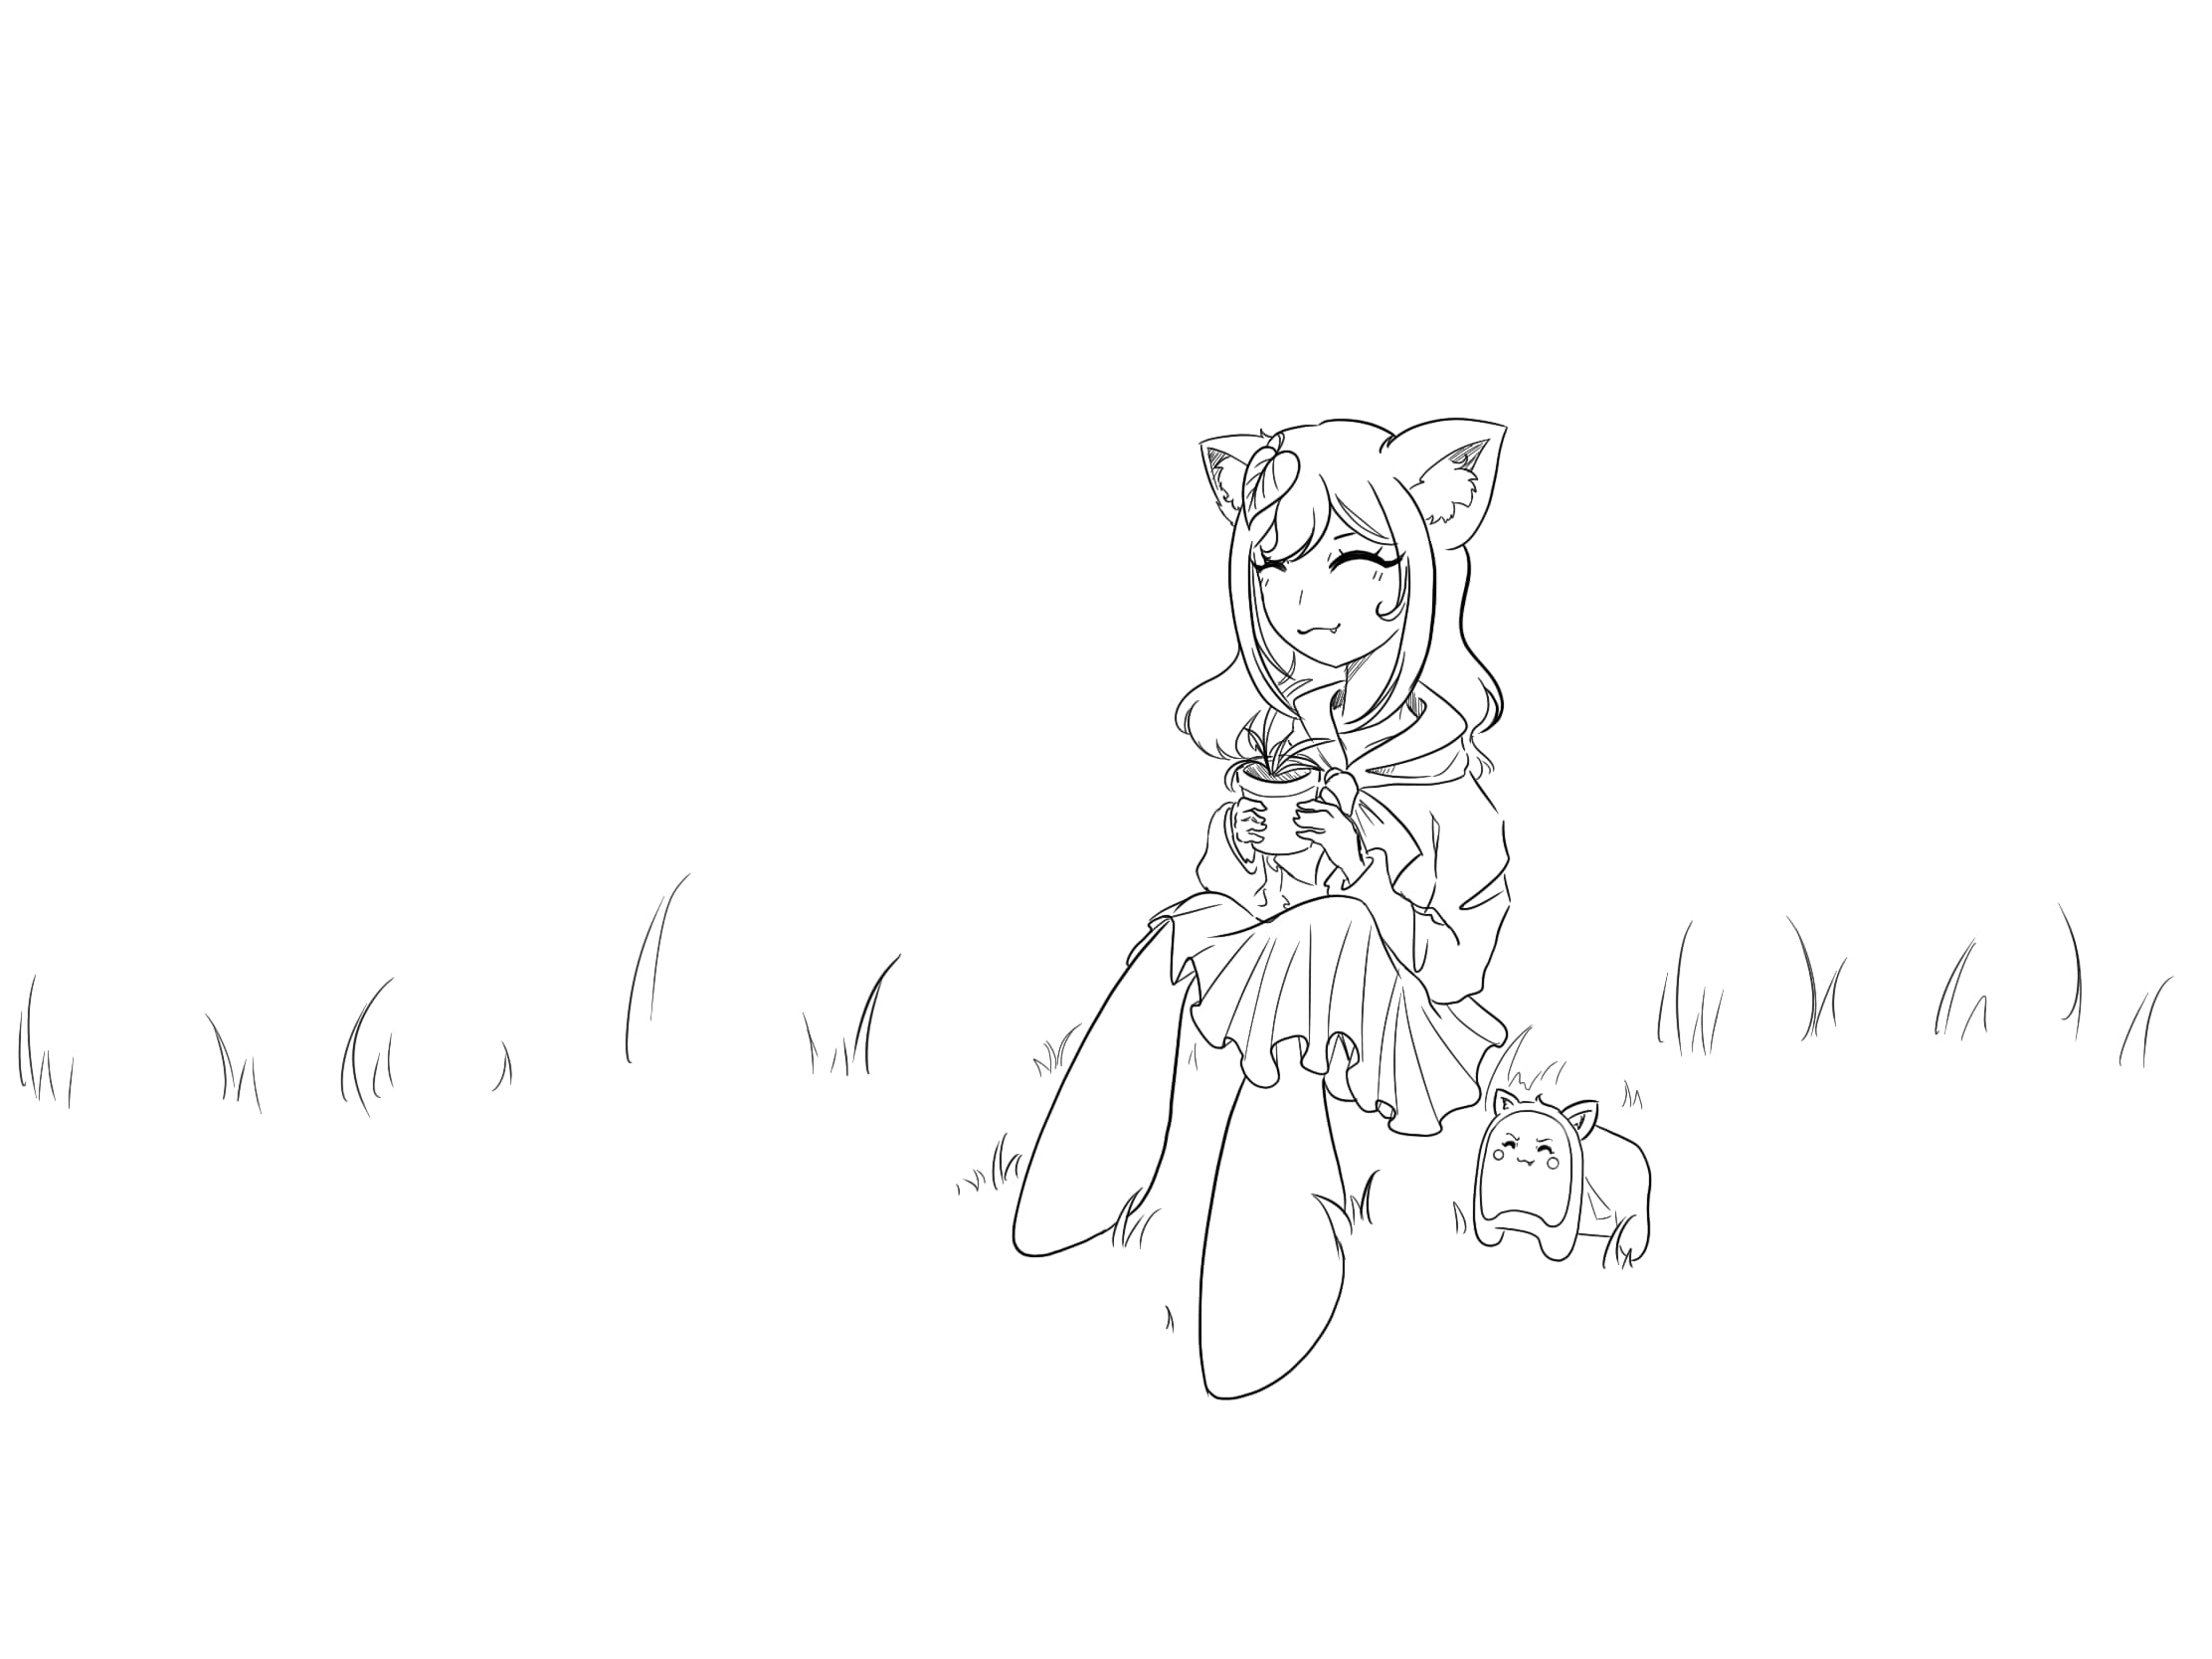 An outline of a catgirl with a realistic basil leaf in hair sitting on a field of grass, and a nekopan (anthropomorphic bread cat). She is wearing a sailor outfit and holding a potted plant.